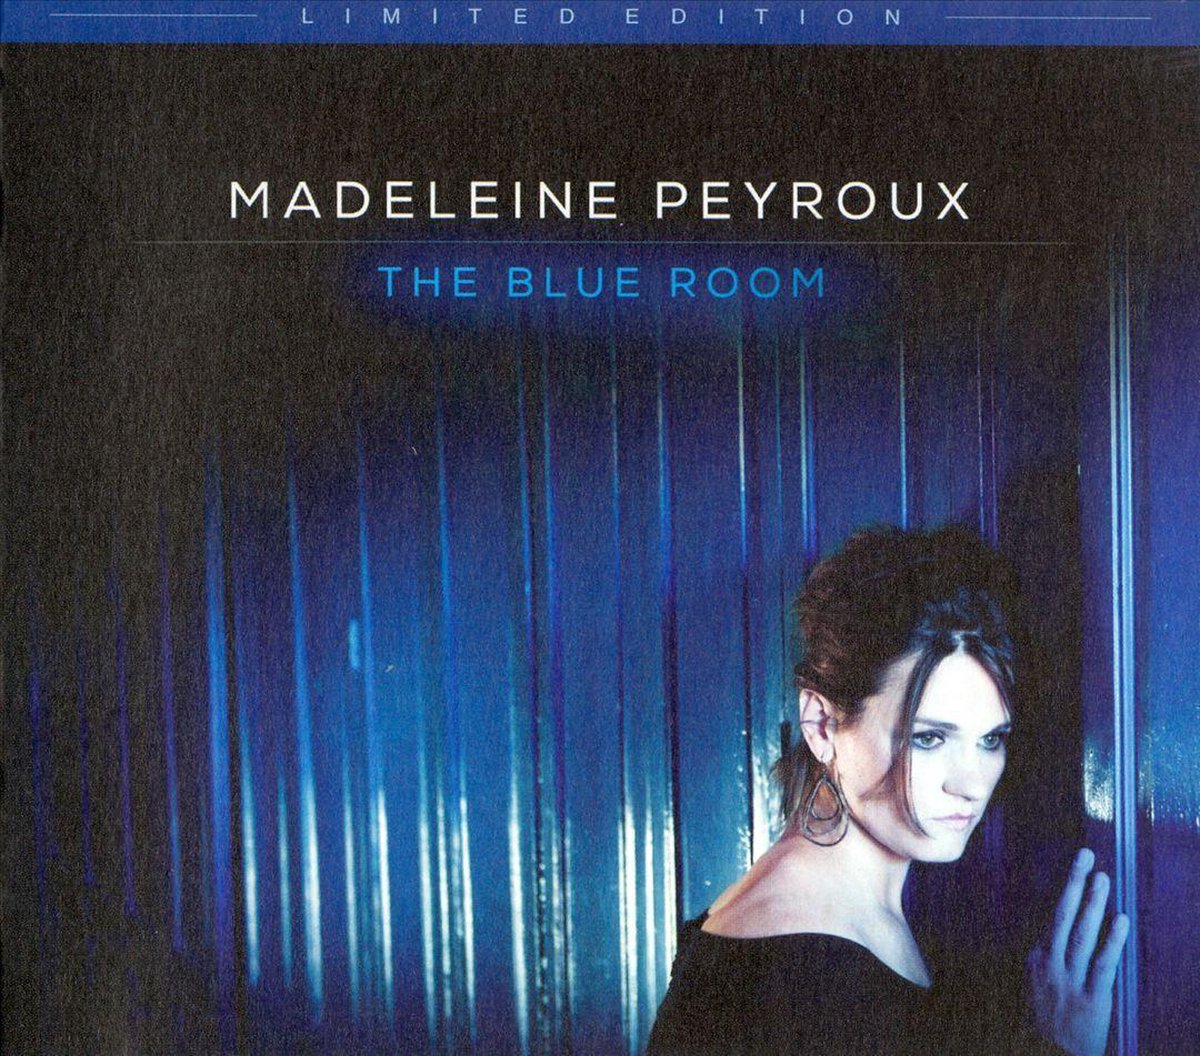 The Blue Room (Deluxe Edition) - Madeleine Peyroux